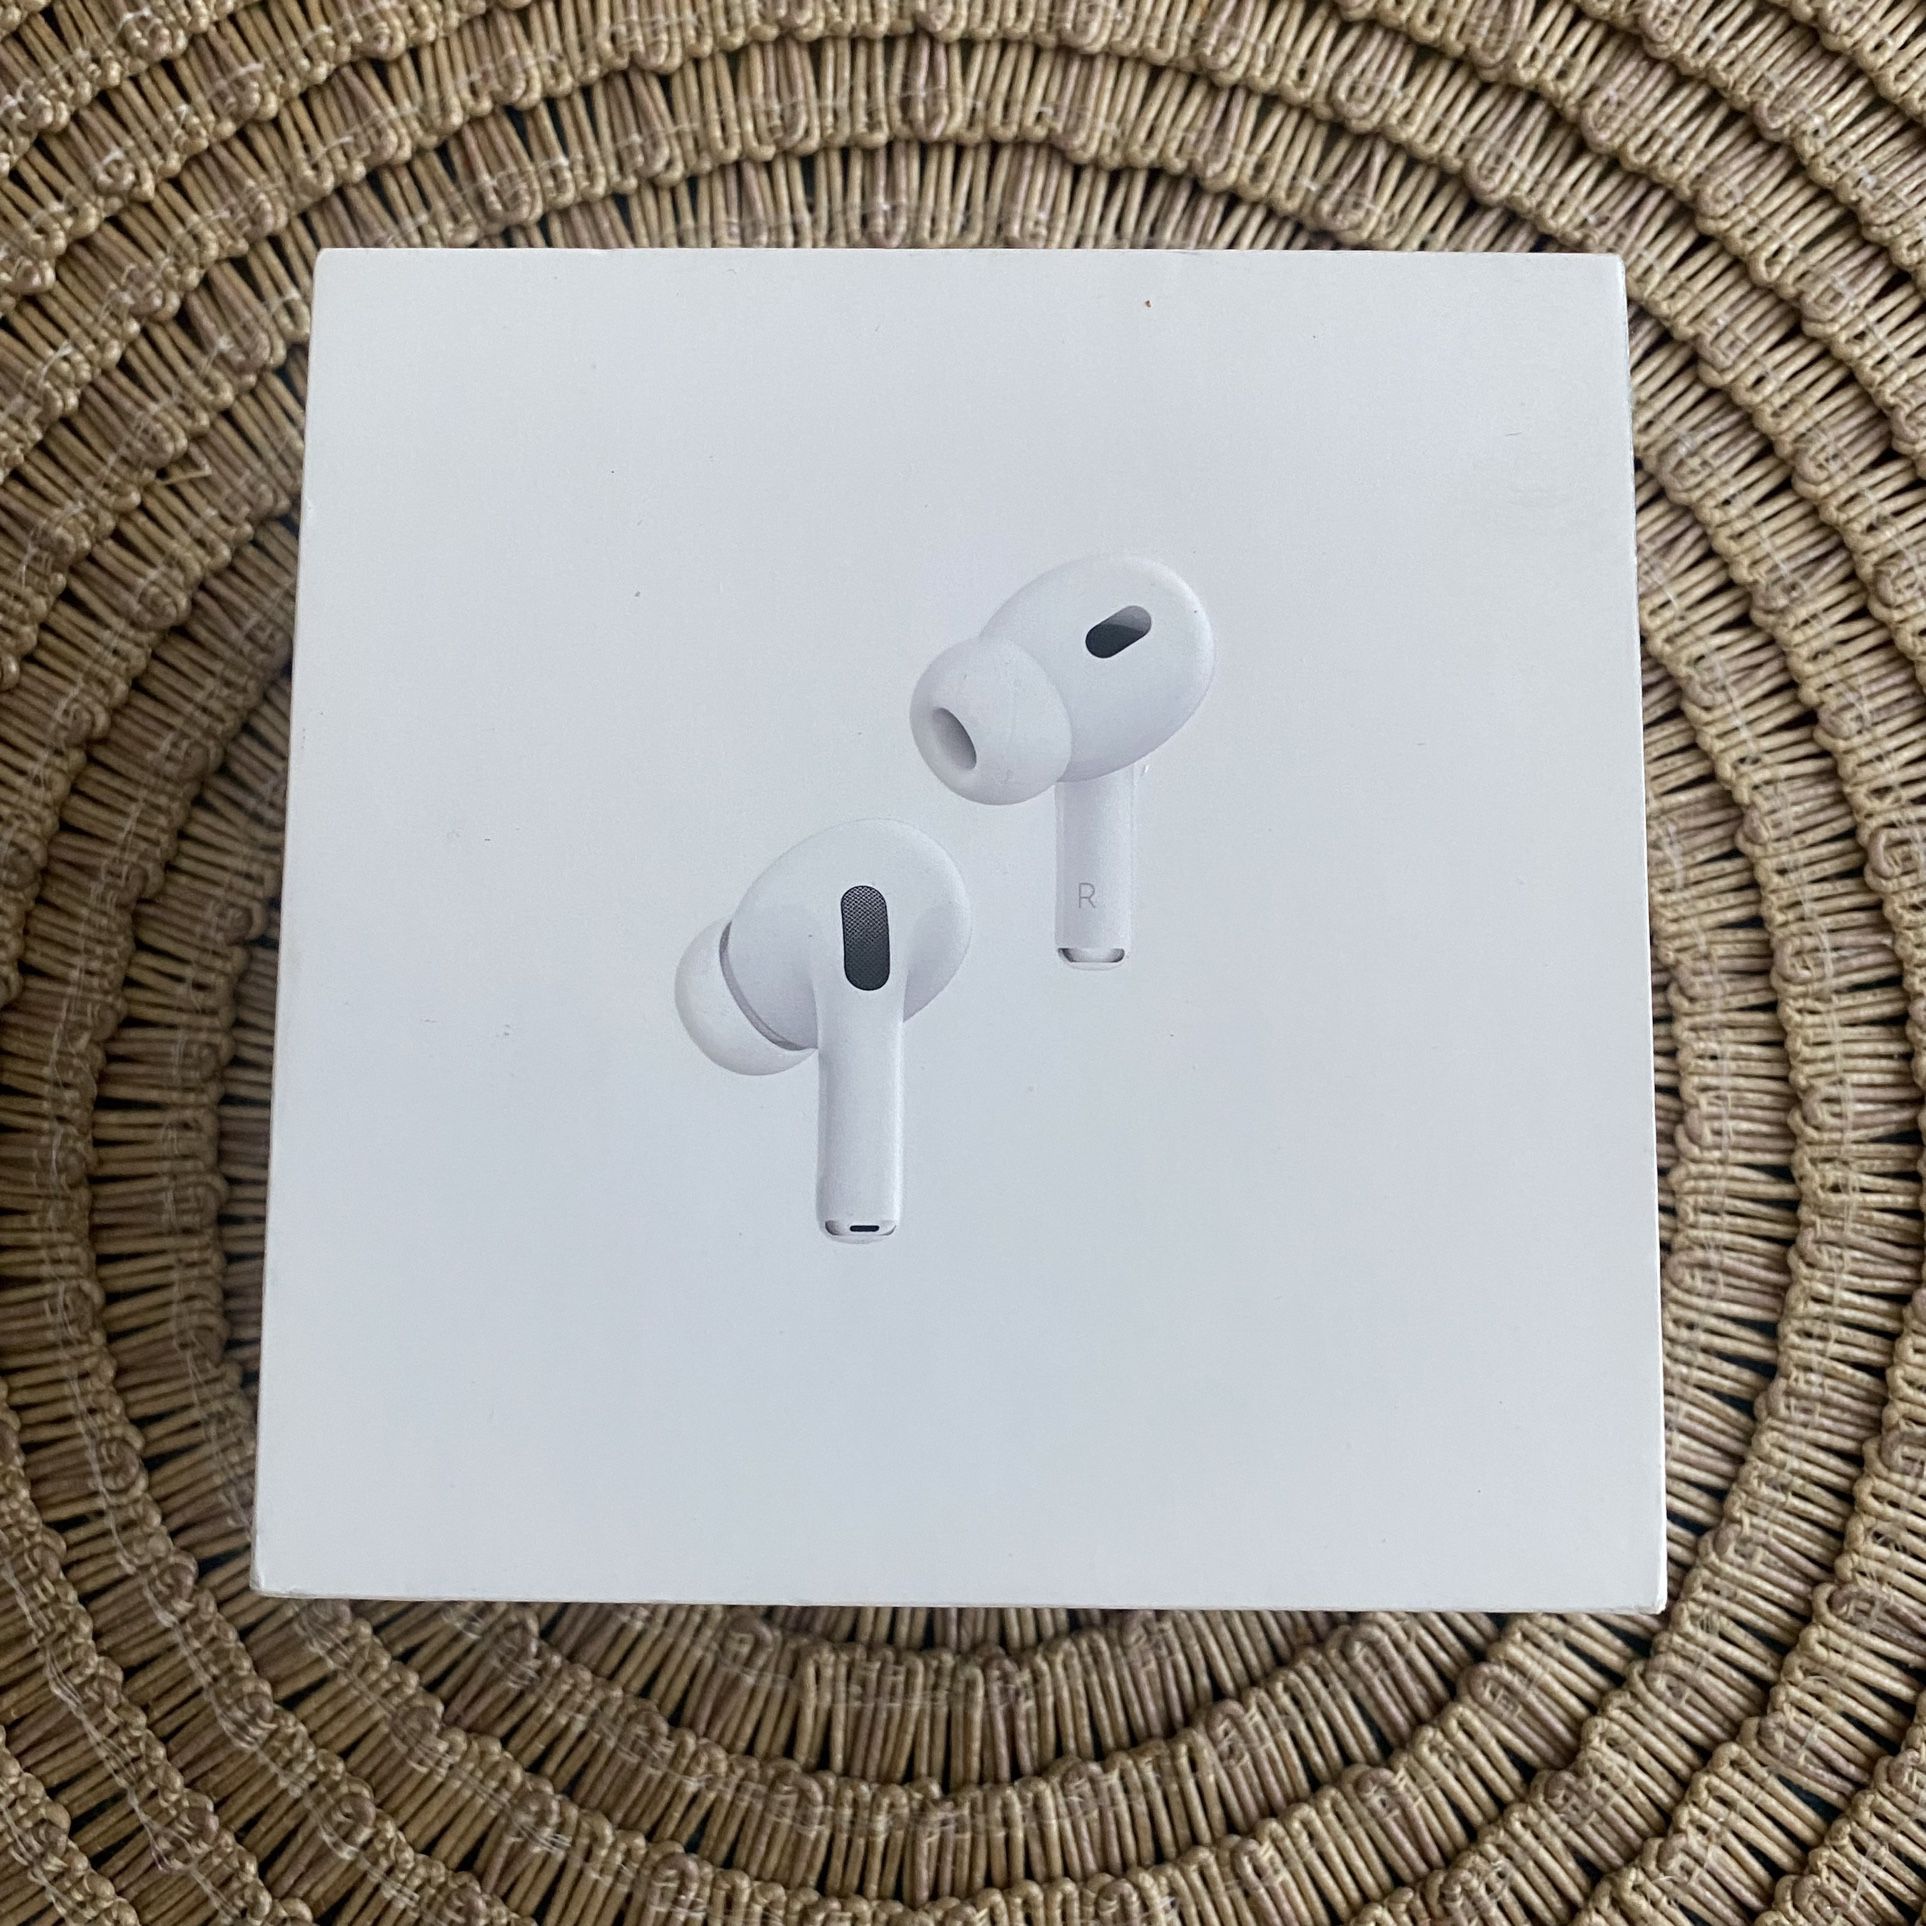 New Apple AirPods 